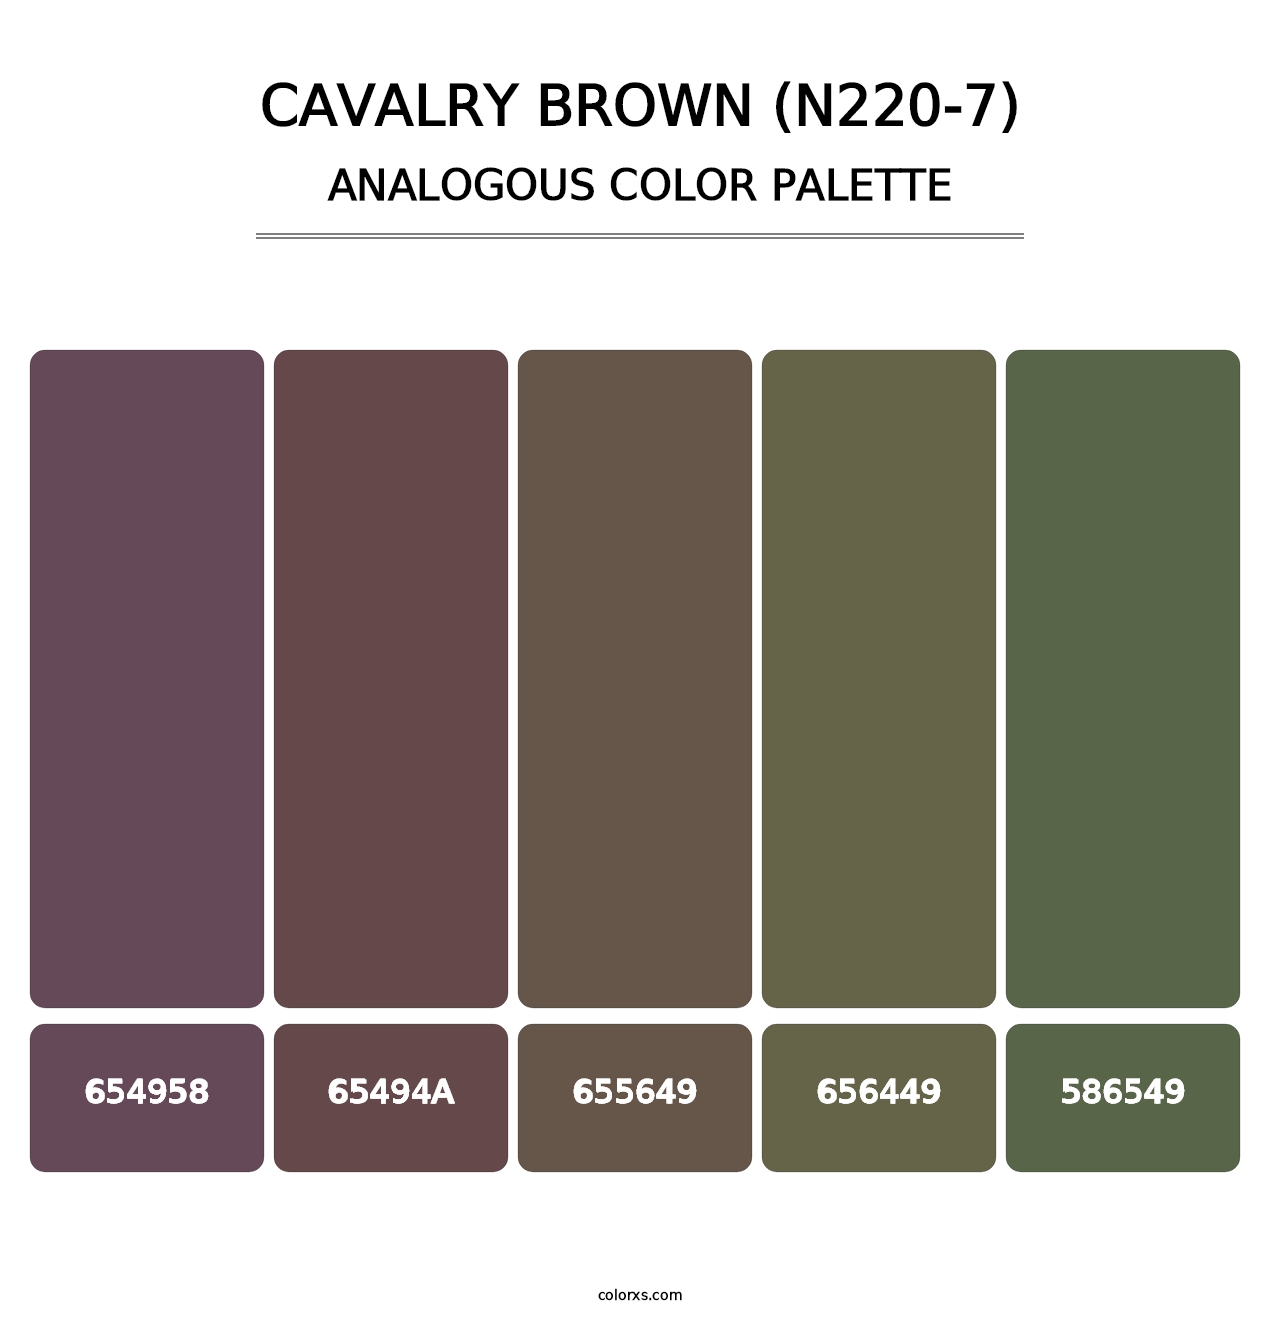 Cavalry Brown (N220-7) - Analogous Color Palette